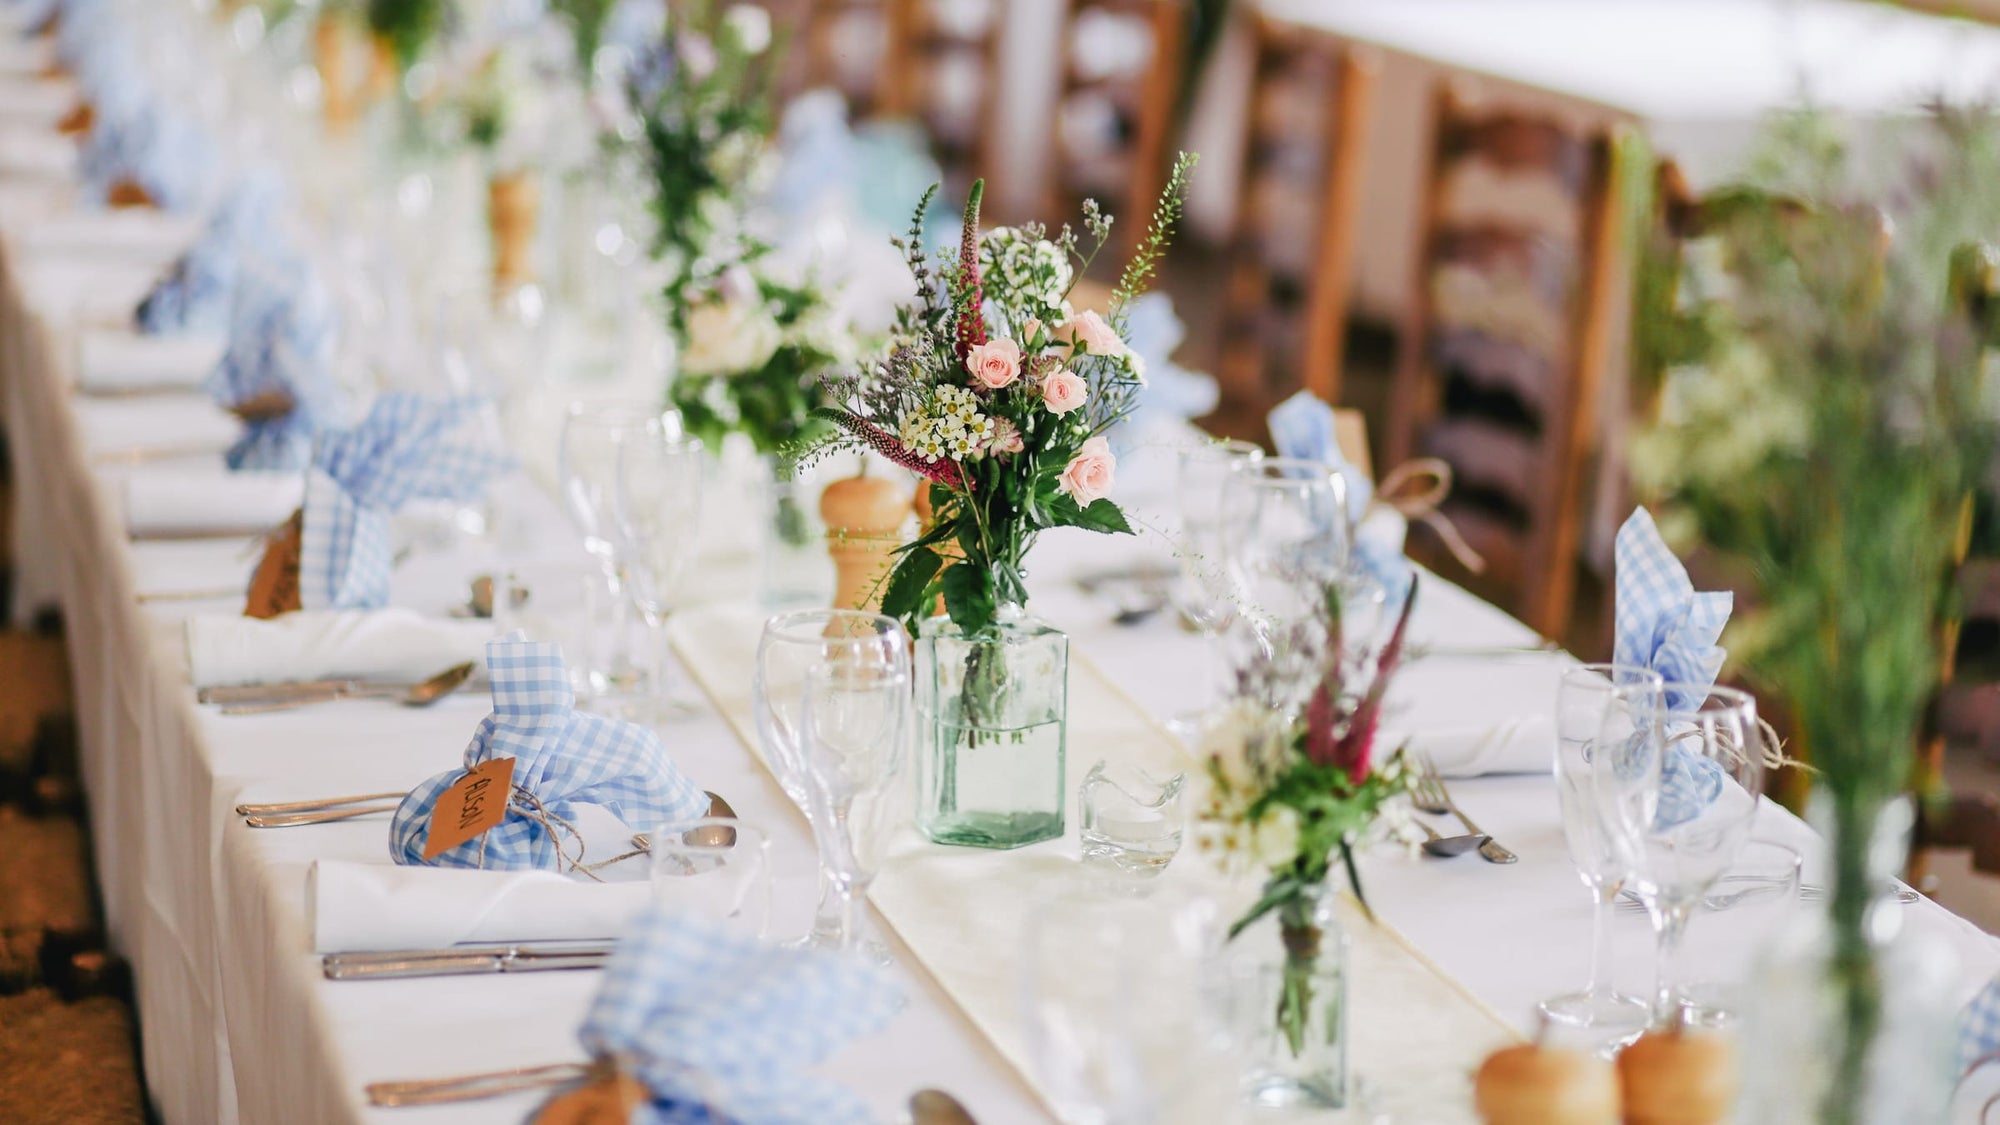 Combining Table Runners with Placemats and Centerpieces